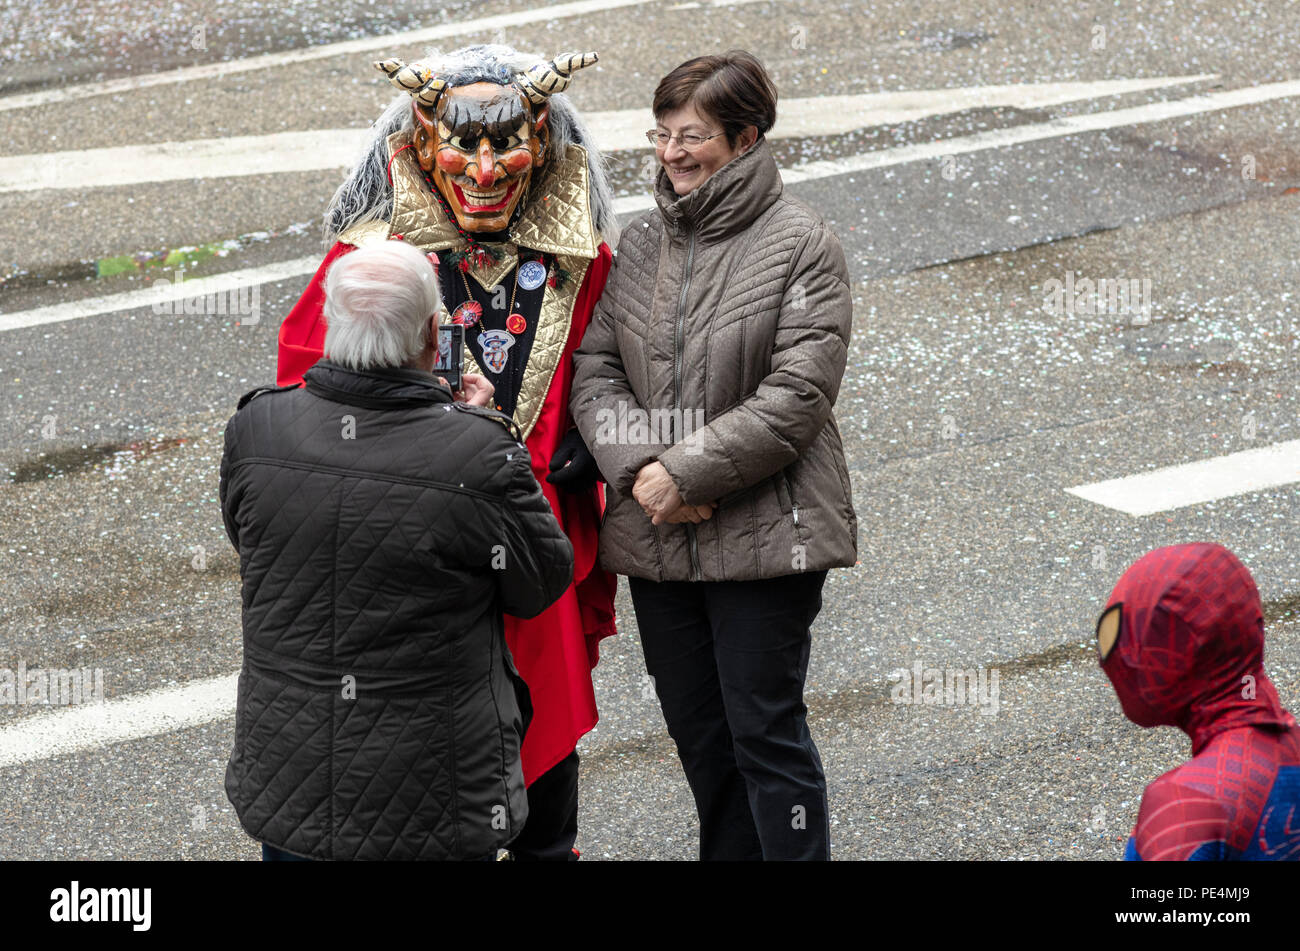 Man taking picture of Teufel's Narren, German devil's fool and woman, Spiderman looking, Strasbourg carnival parade, Alsace, France, Europe, Stock Photo